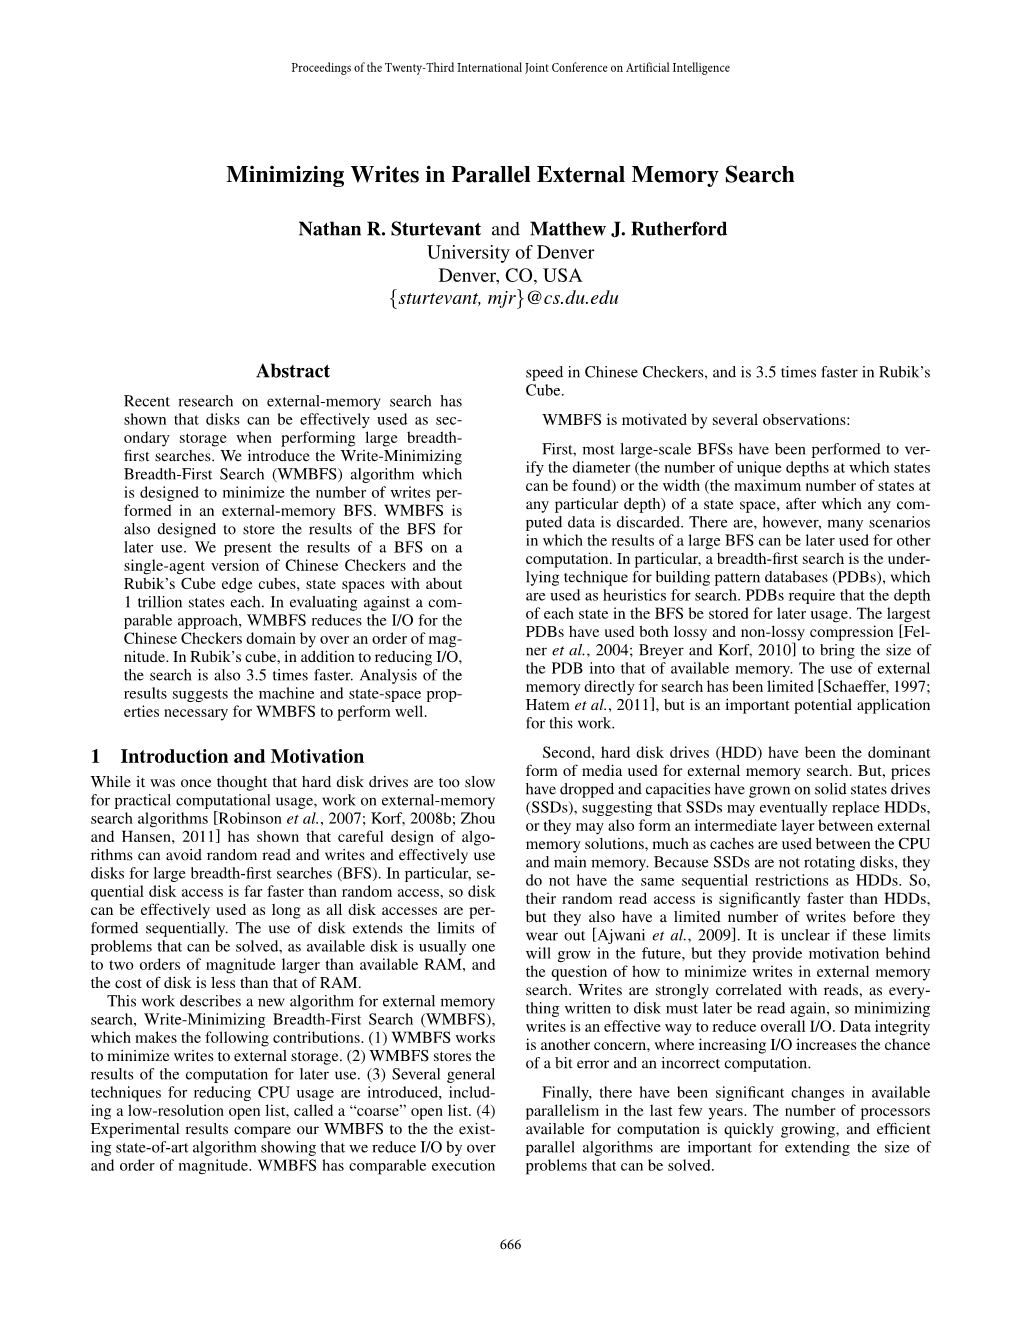 Minimizing Writes in Parallel External Memory Search